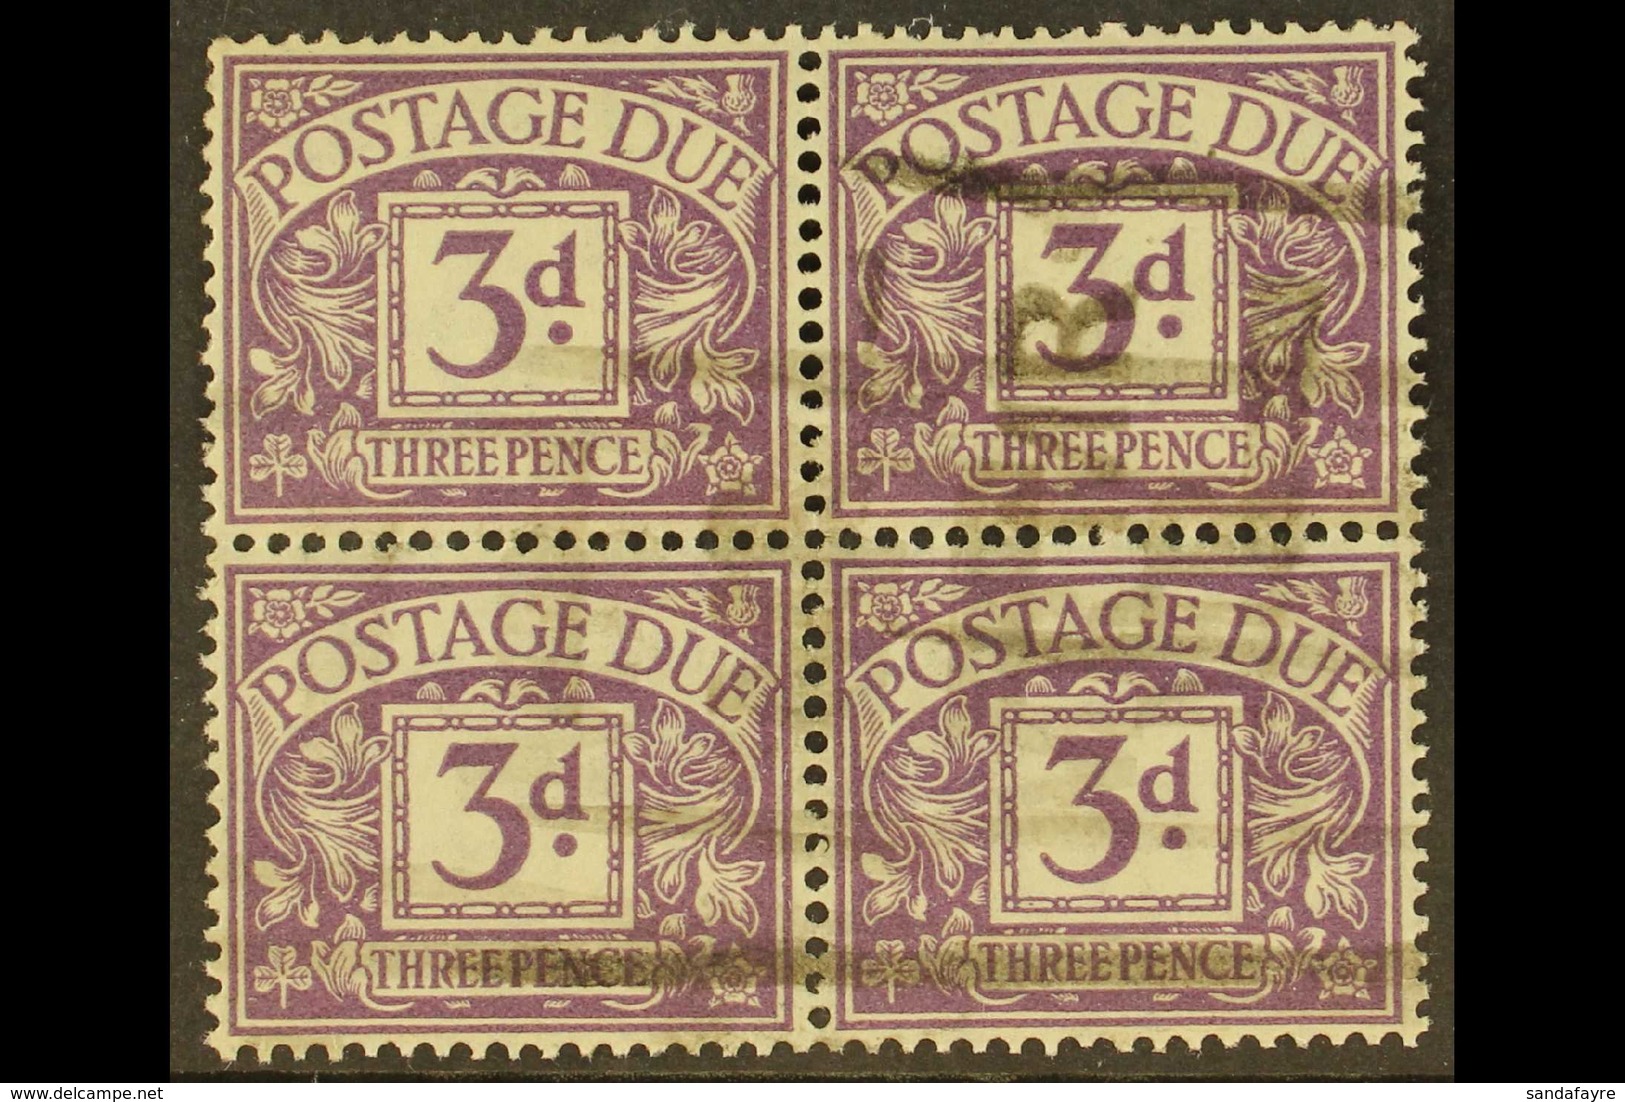 POSTAGE DUES  1924-31 3d Dull Violet EXPERIMENTAL PAPER Variety, SG D14b, Good Used BLOCK Of 4 Cancelled By Parcel Postm - Ohne Zuordnung